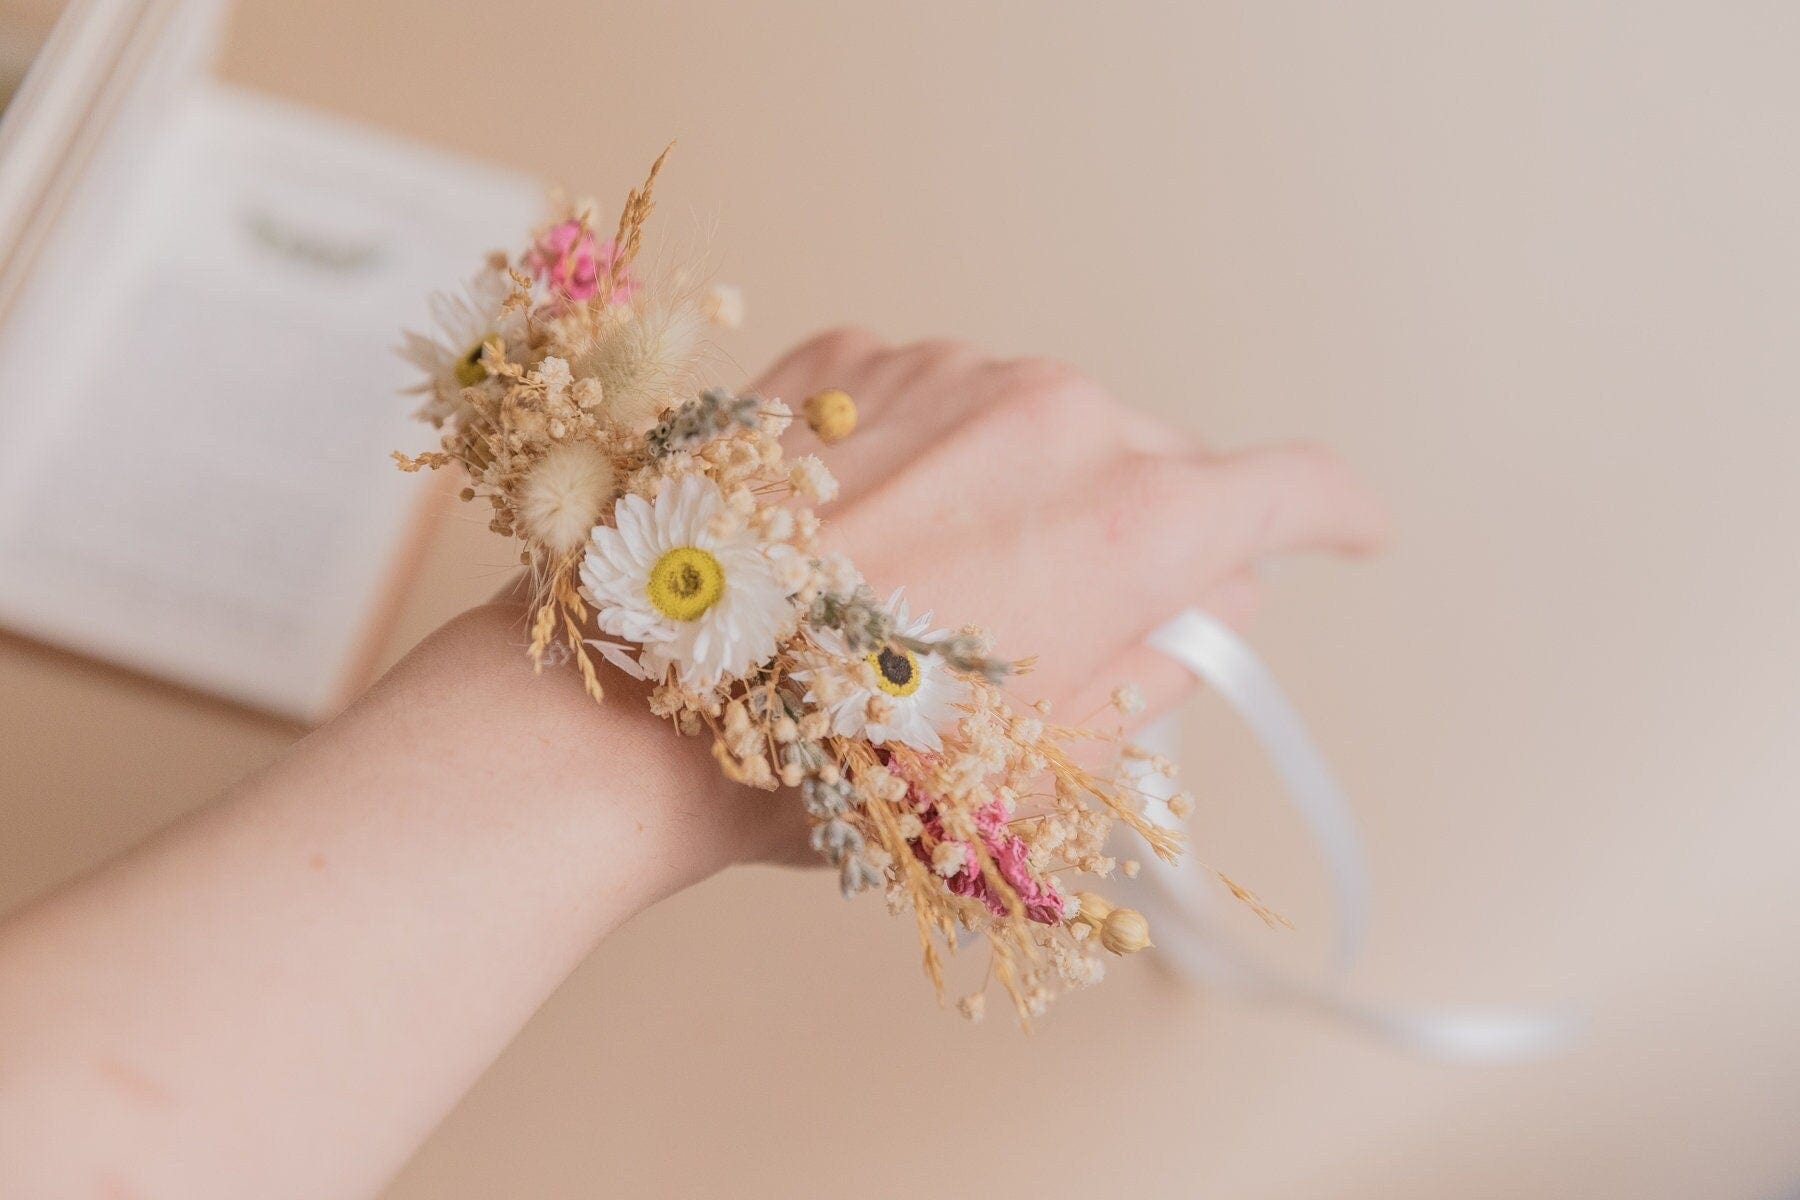 How To Make Beautiful Floral Arrangements For Corsages With Baby's Breath And Small Flowers